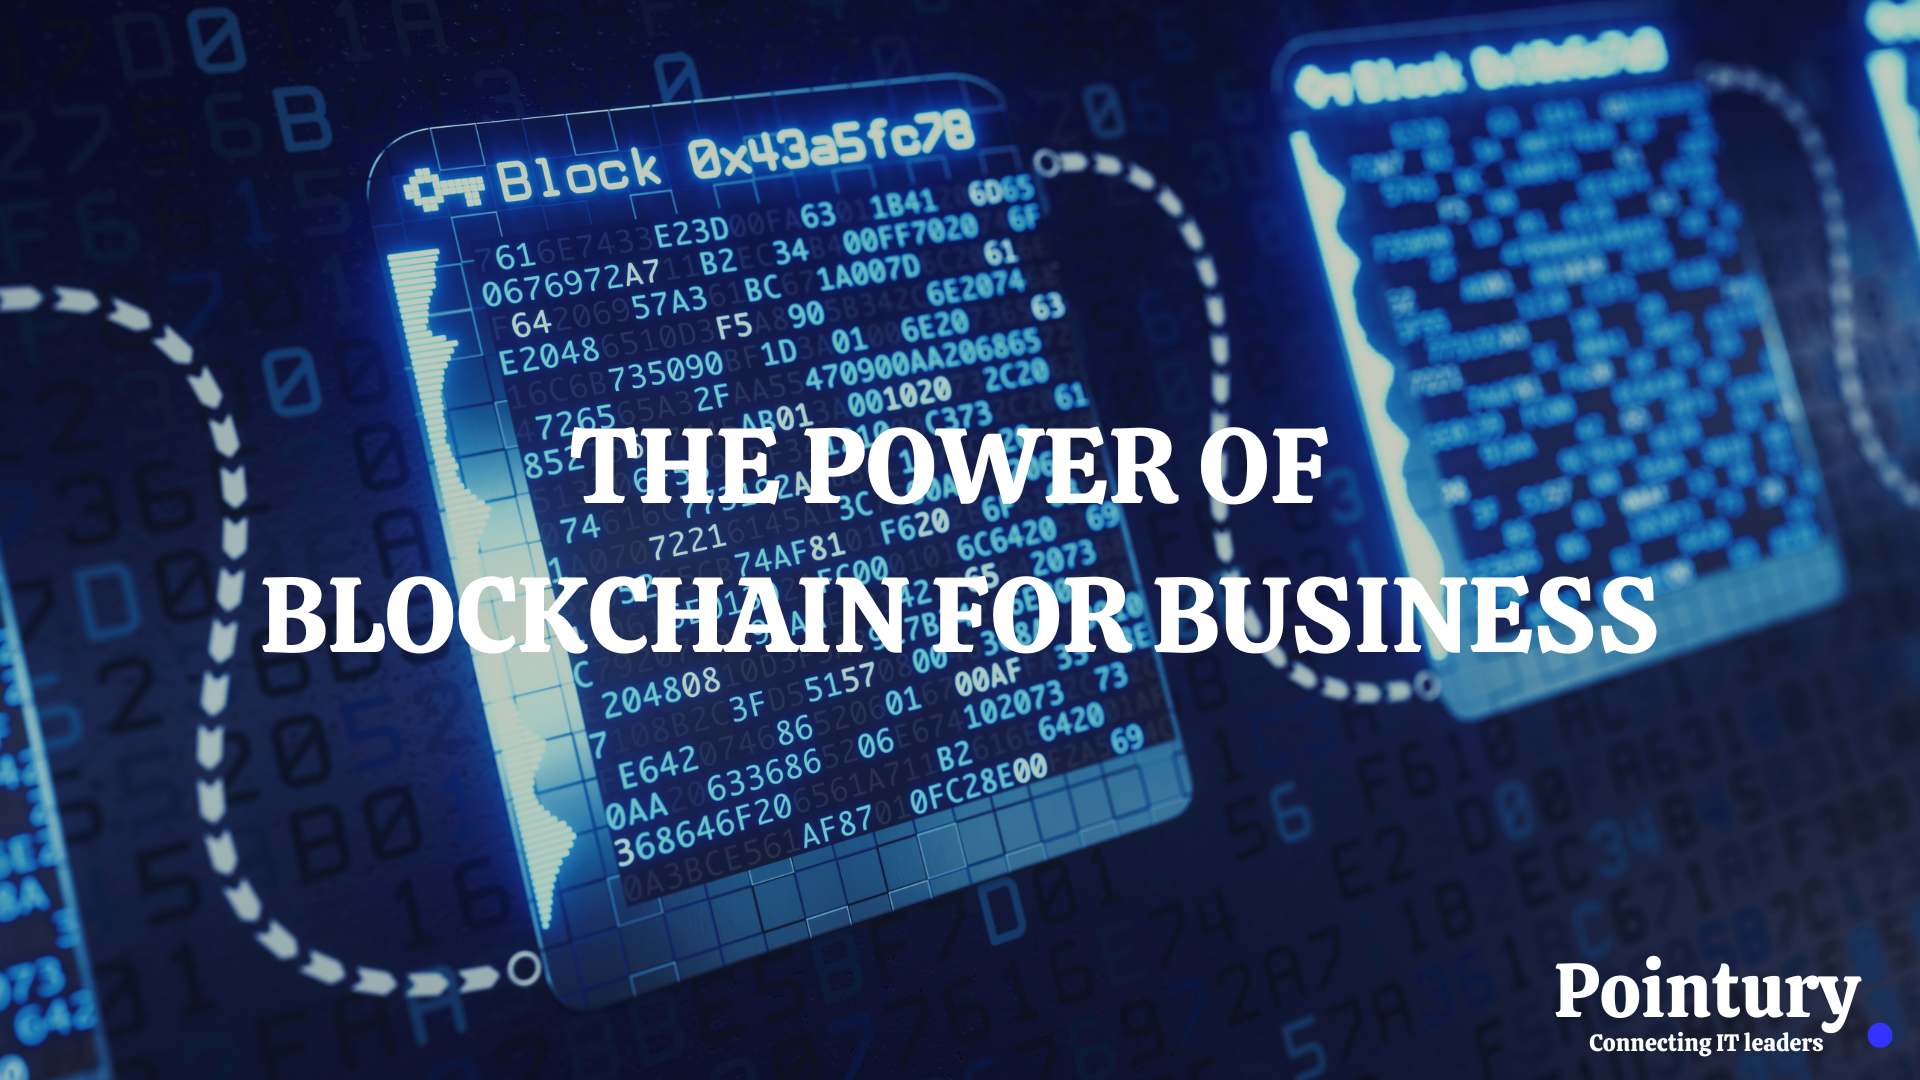 THE POWER OF BLOCKCHAIN FOR BUSINESS